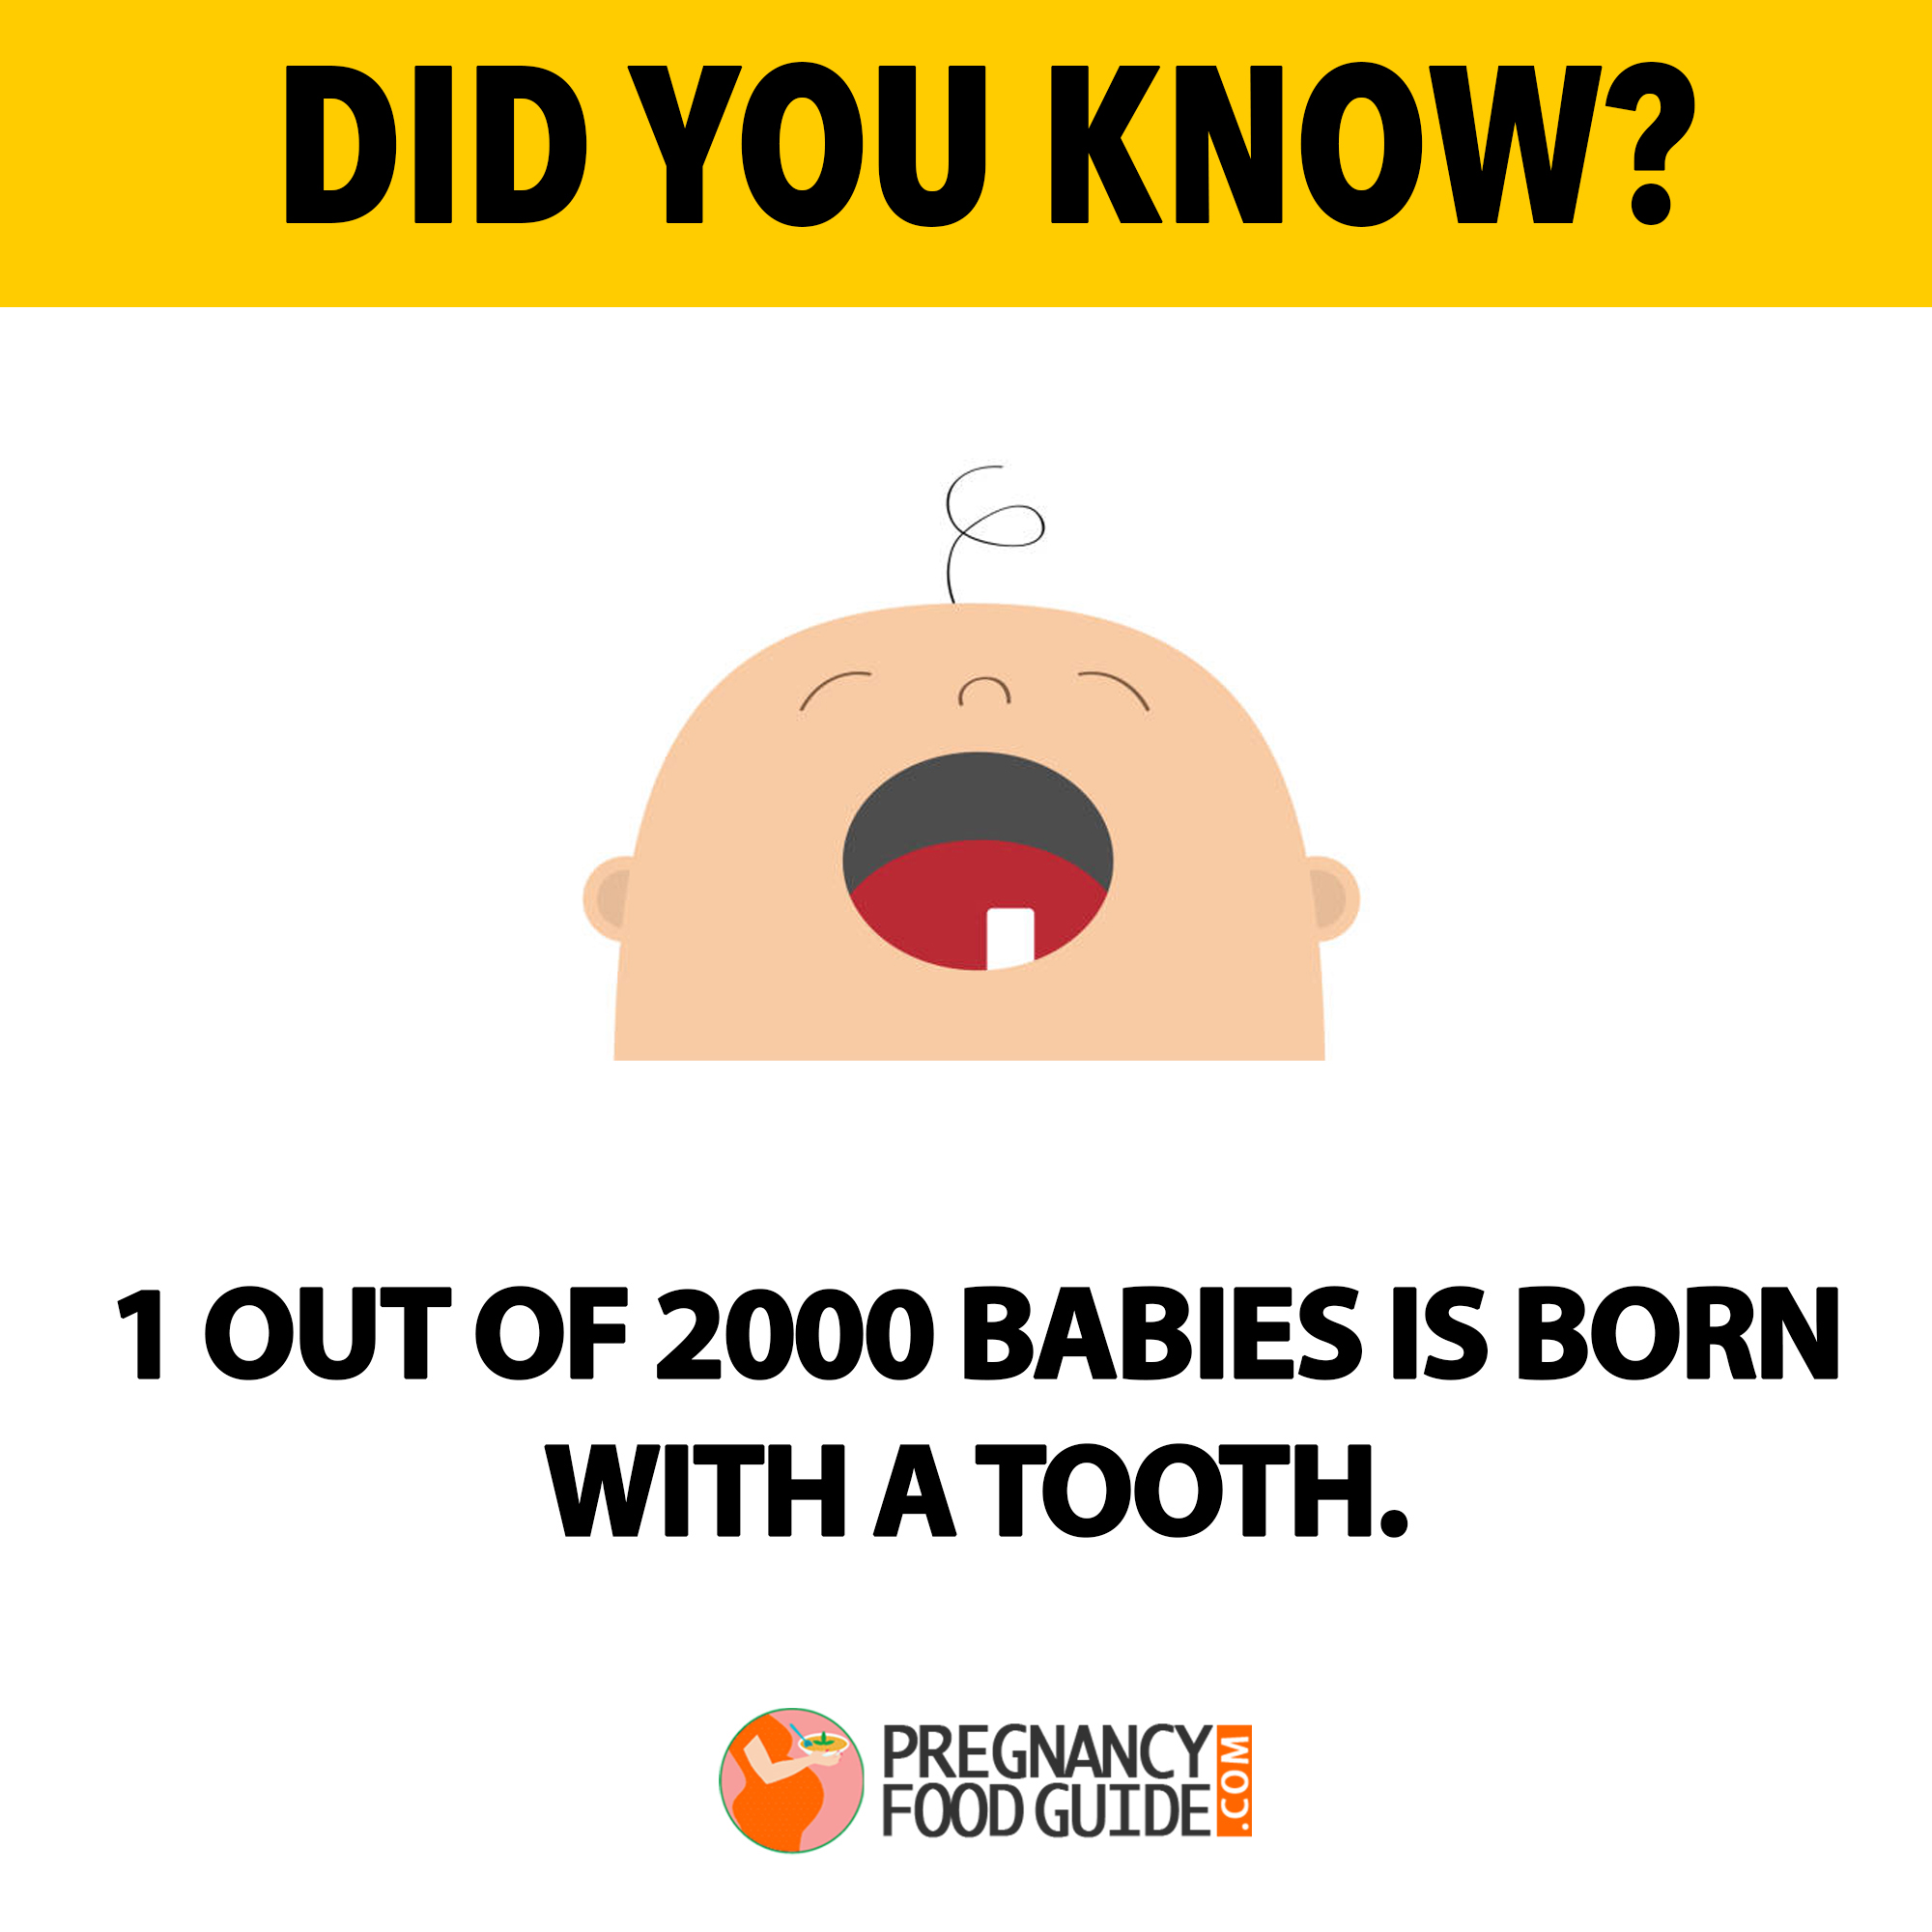 baby born with tooth